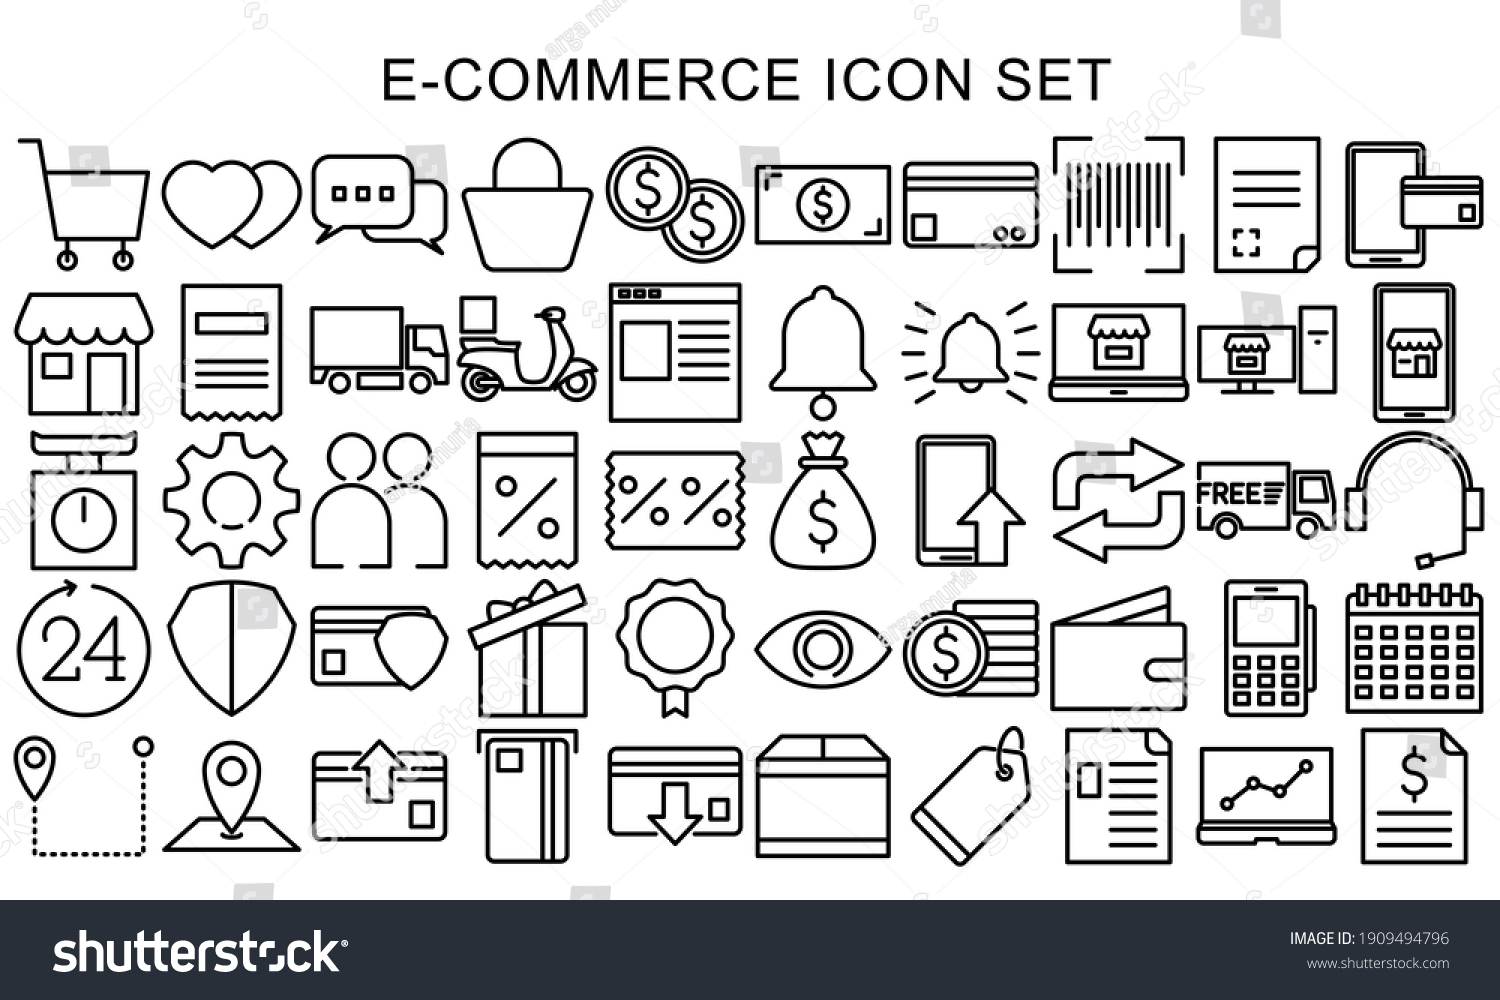 SVG of E-commerce business and Online shopping icons collection set, Symbol black outline design for application and websites on white background, Vector illustration EPS 10 ready convert to SVG svg